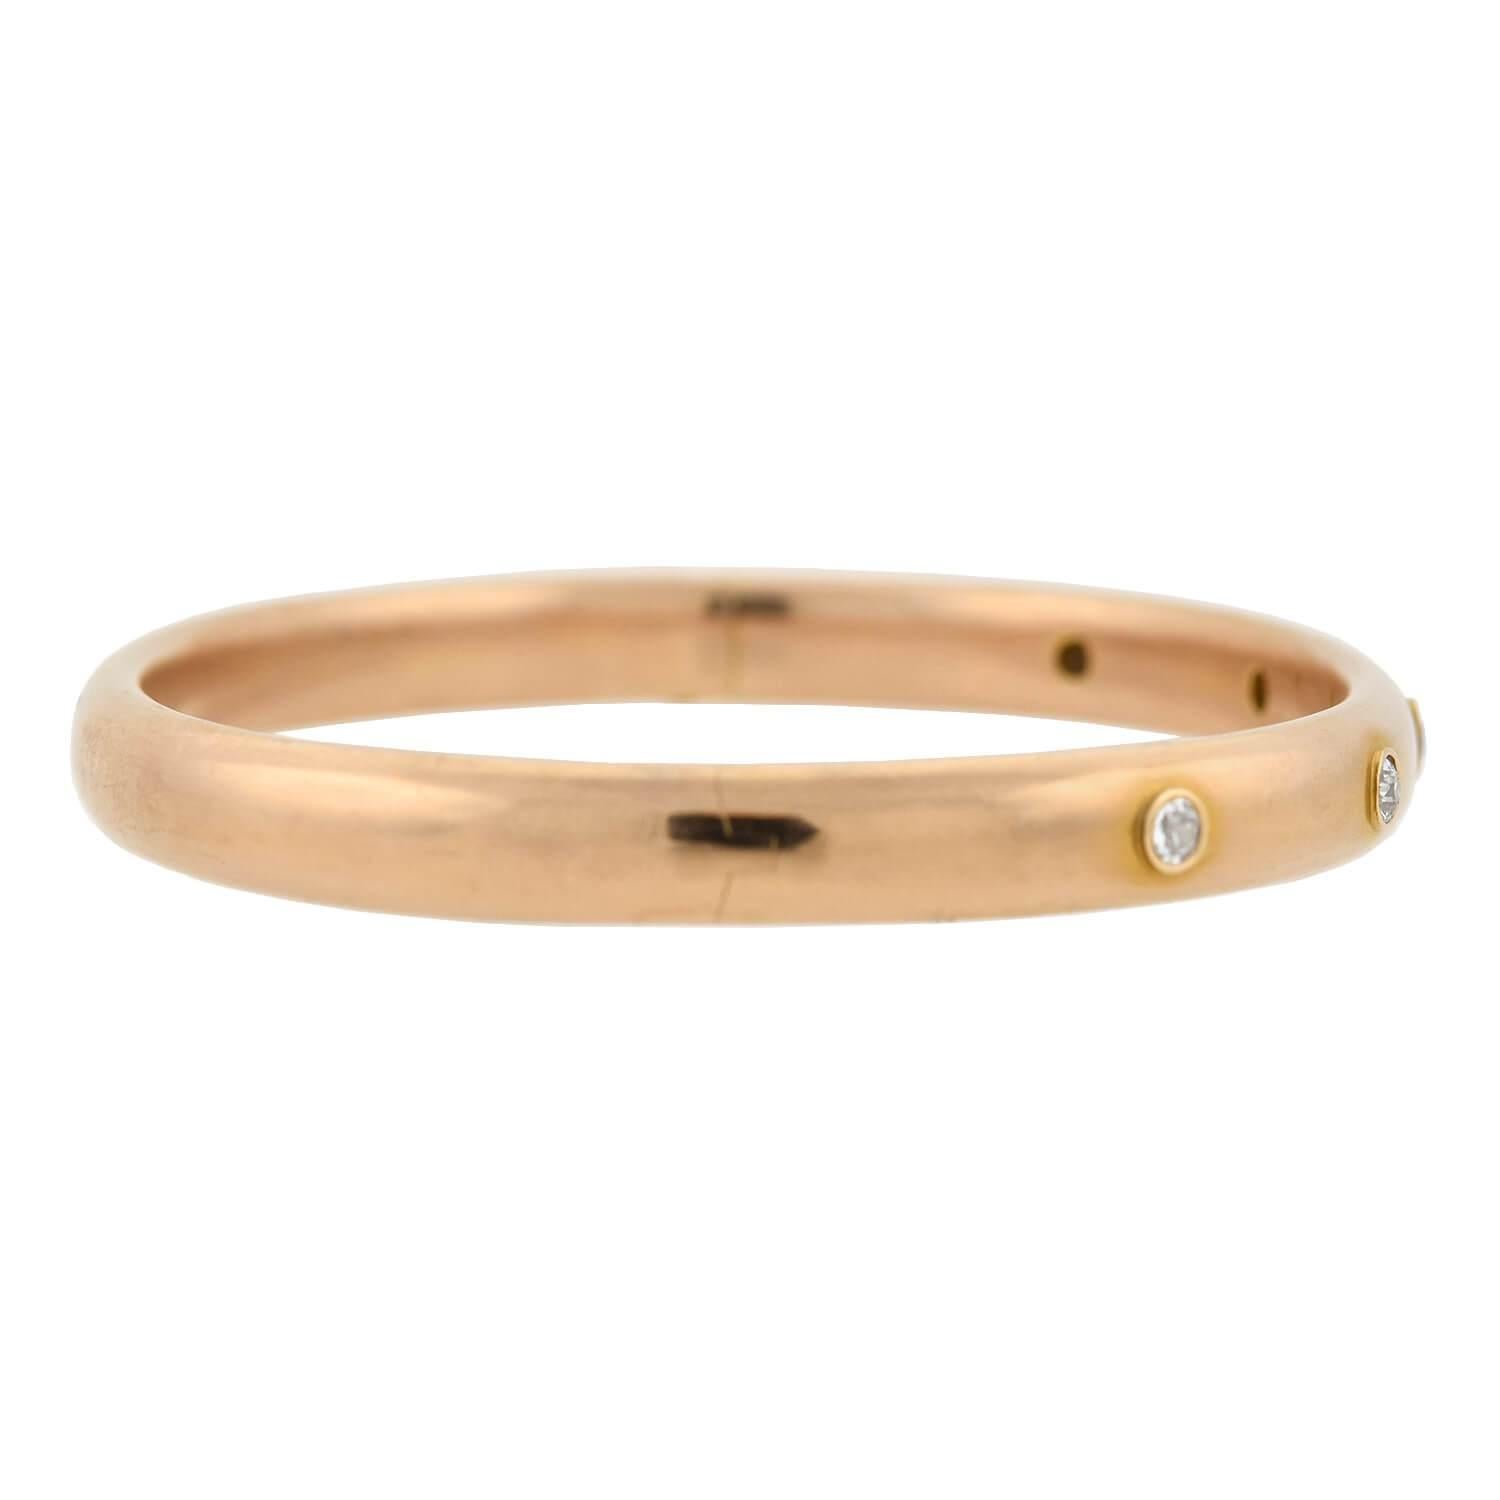 A stunning bangle bracelet from the Victorian (ca1880) era! Crafted in 14kt rose gold, this hinged bangle features five of sparkling old Mine Cut diamonds set across the front. The bezel set stones weigh approximately 1.00ctw combined, sparkling